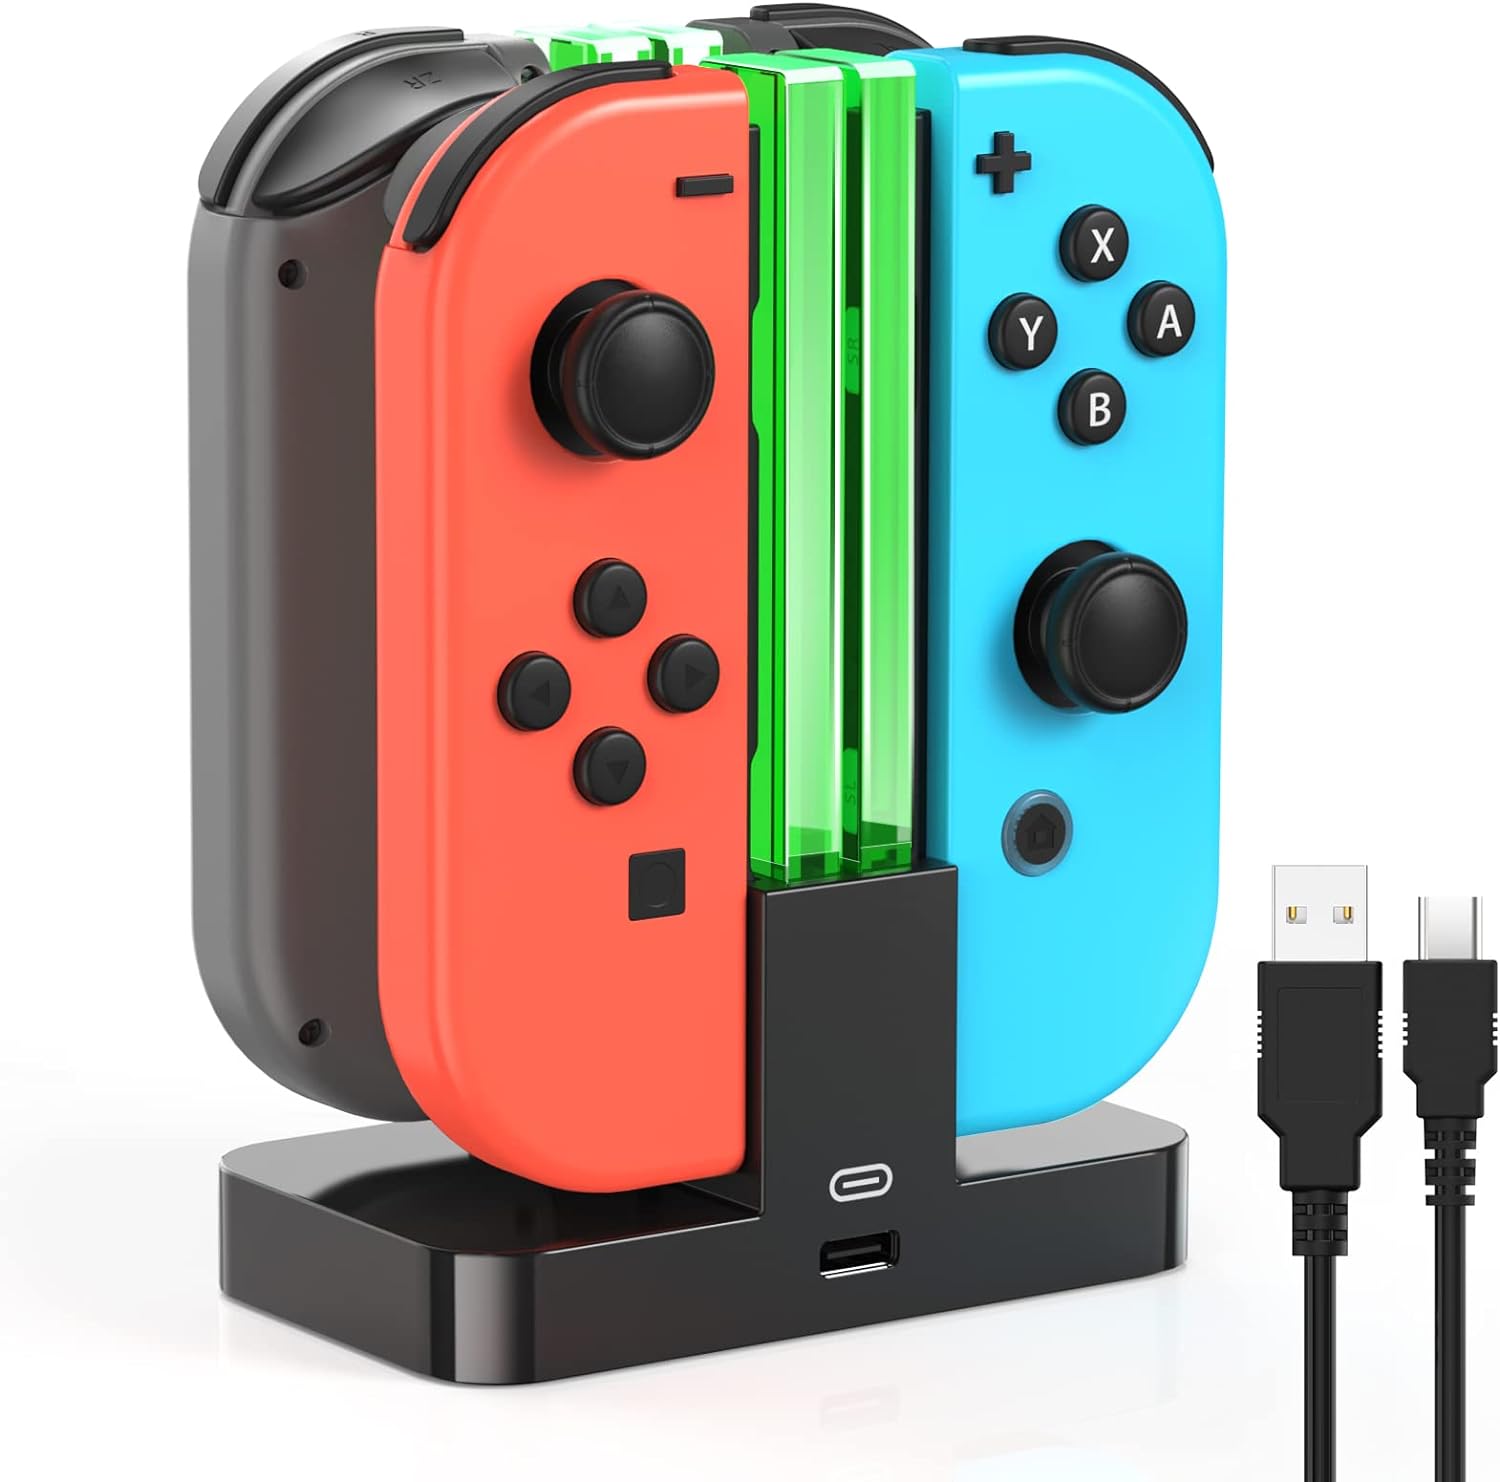 TALK WORKS Joy-Con Charging Dock Station for Nintendo Switch Gaming Controllers $7 + Free Shipping w/ Amazon Prime